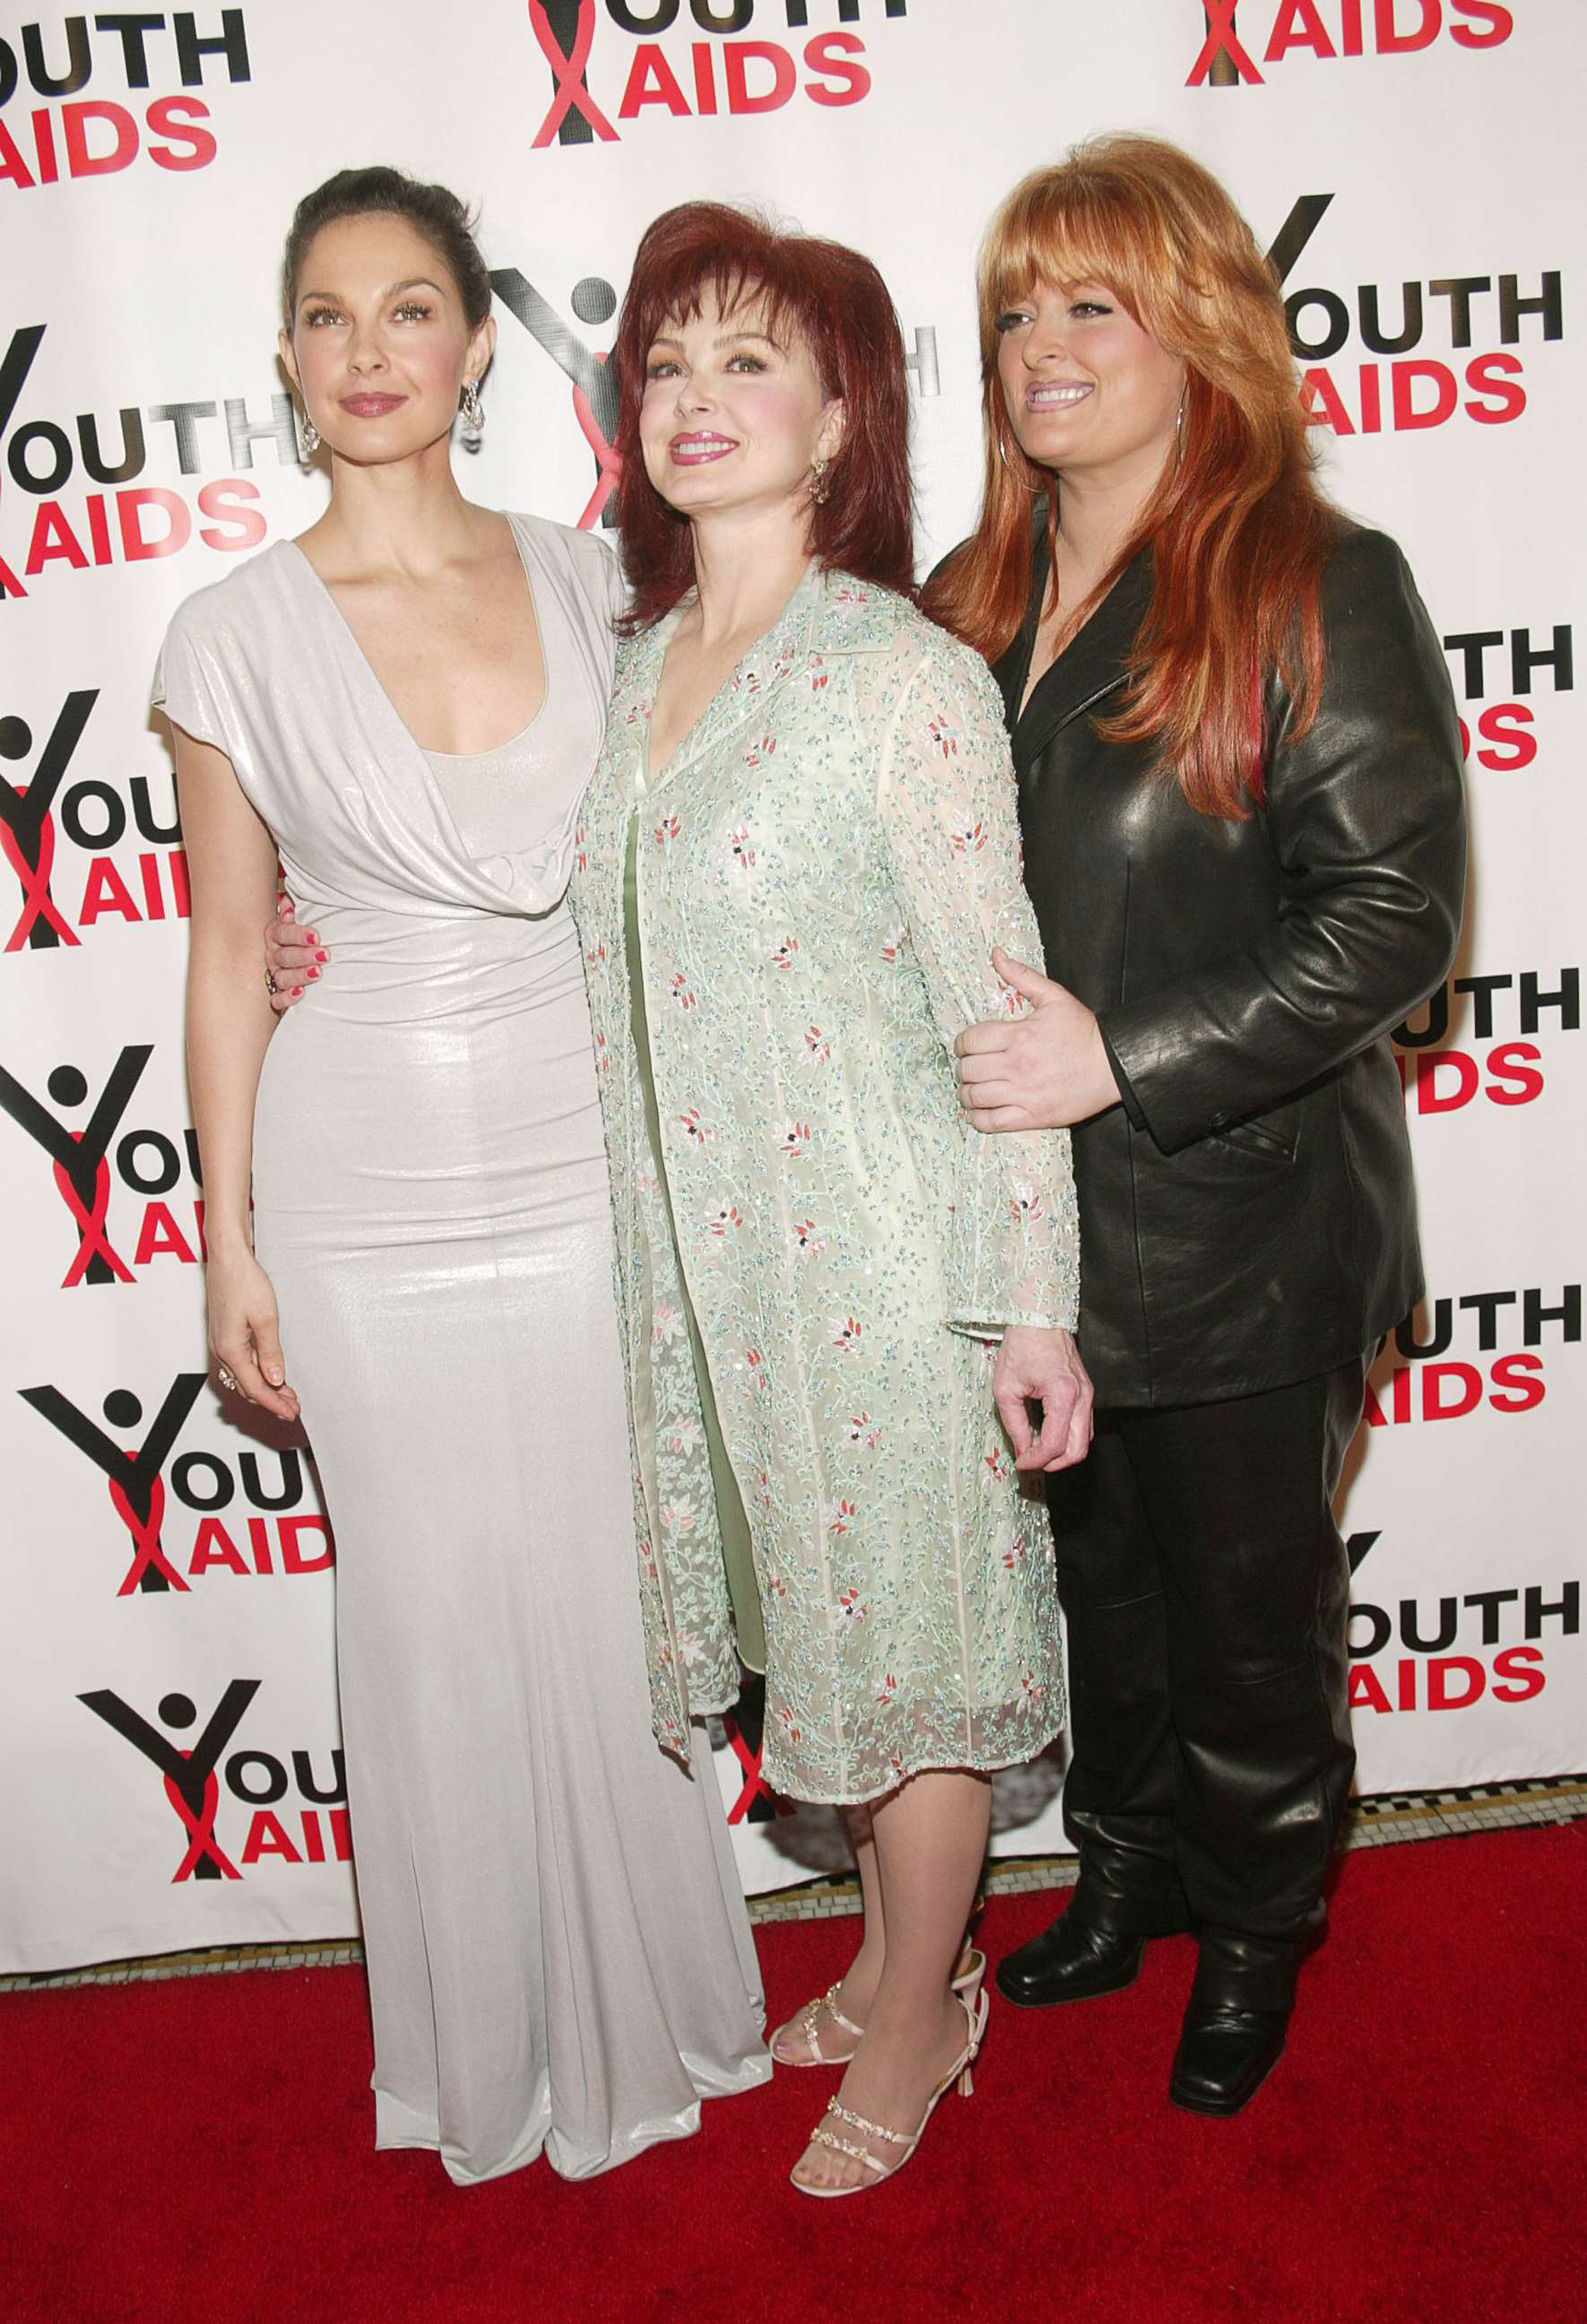 PHOTO: Ashley, Naomi and Wynonna Judd arrive at the "YouthAIDS Annual Benefit Gala 2003," Oct. 27, 2003, in New York.